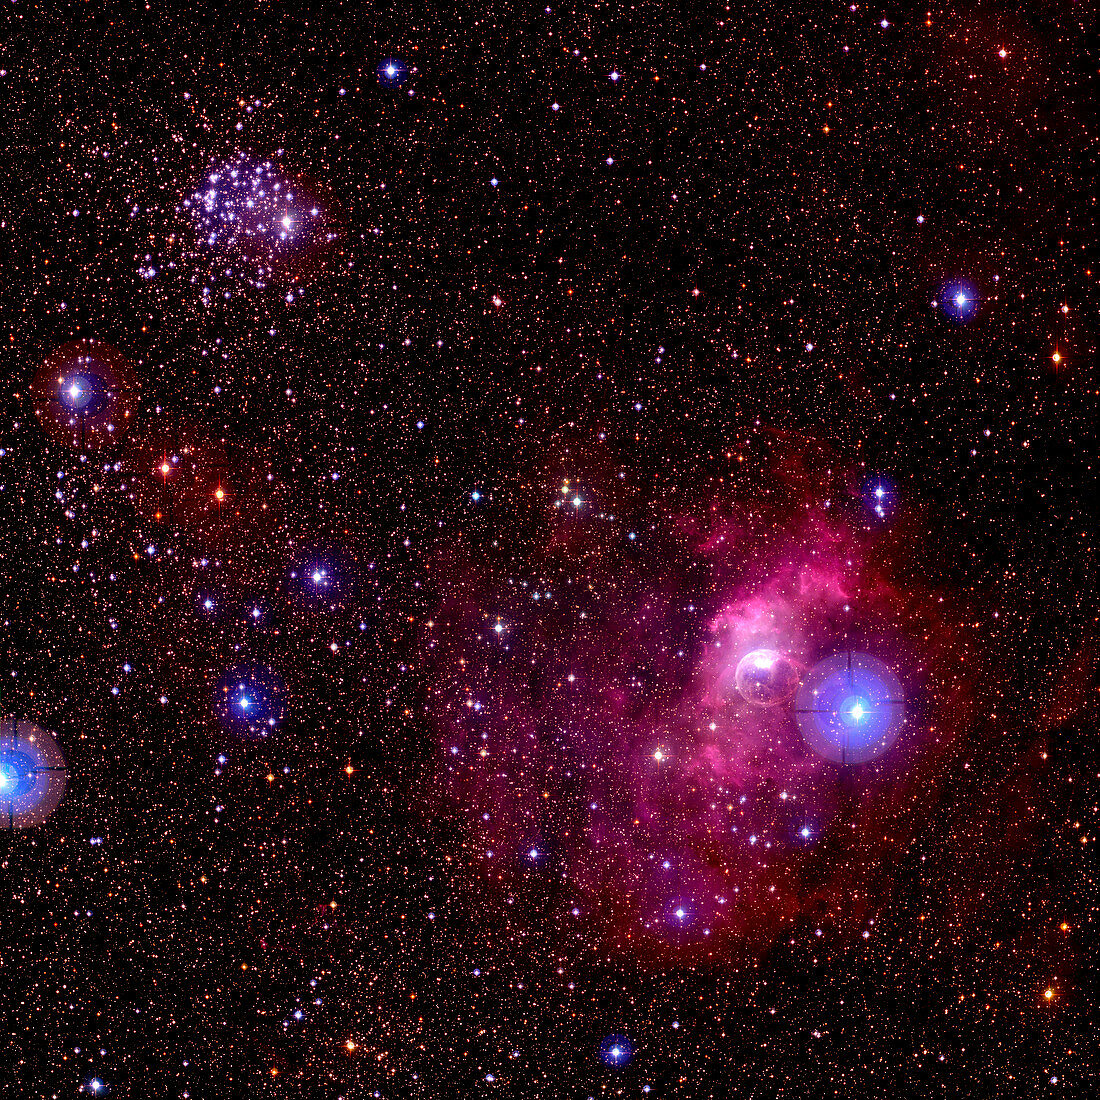 Bubble nebula and star cluster M52